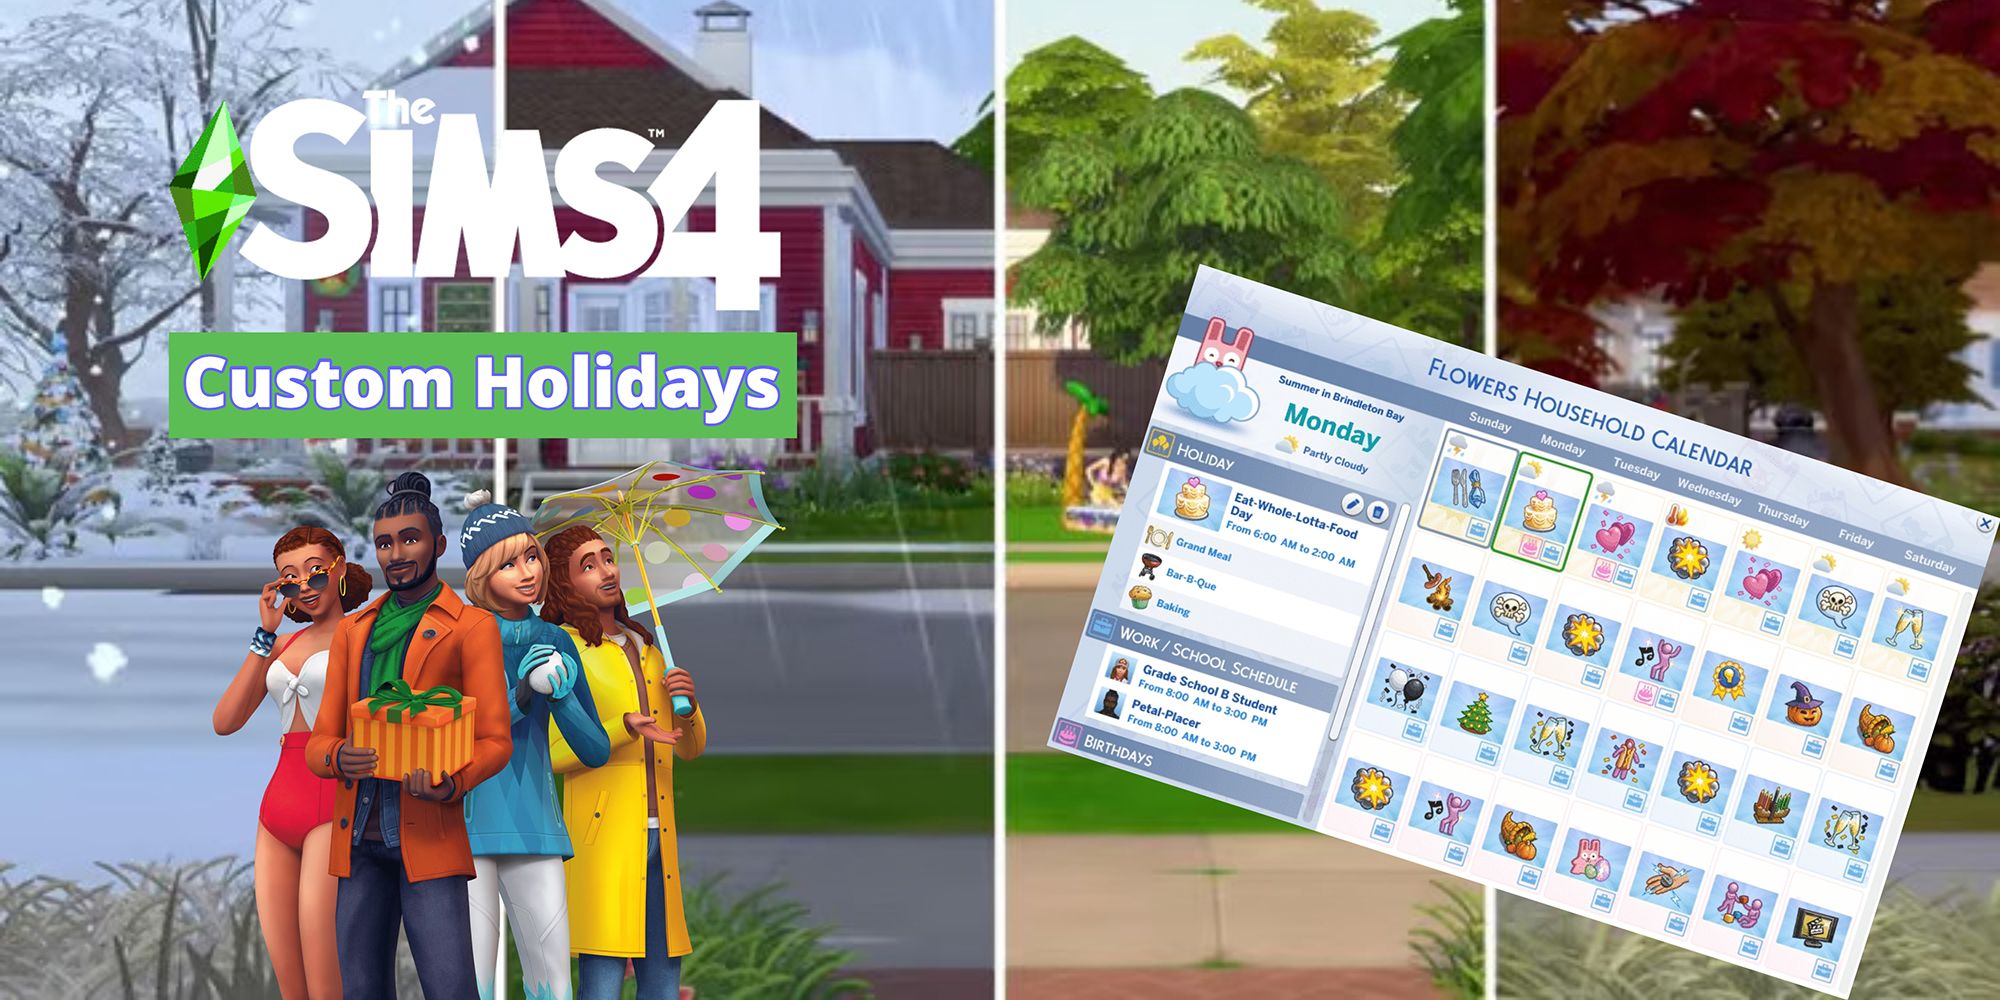 A promotional collage about custom holidays in the Sims 4 